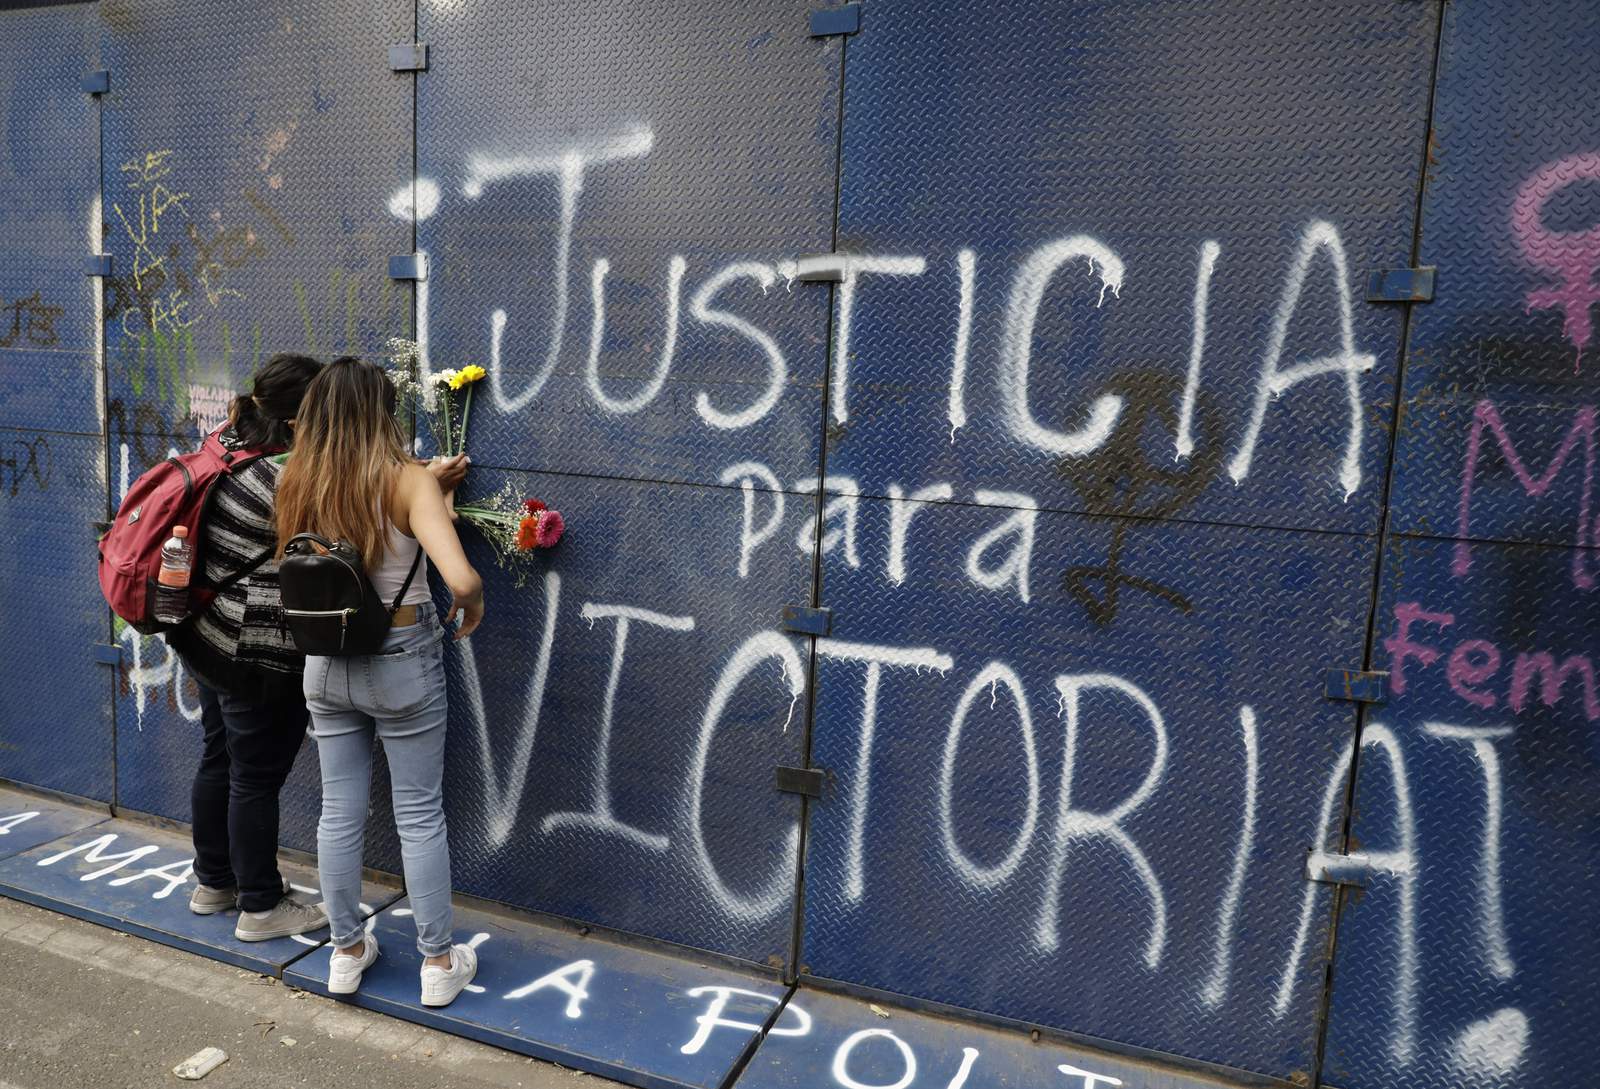 Mexico: Woman who died in police custody also was abused